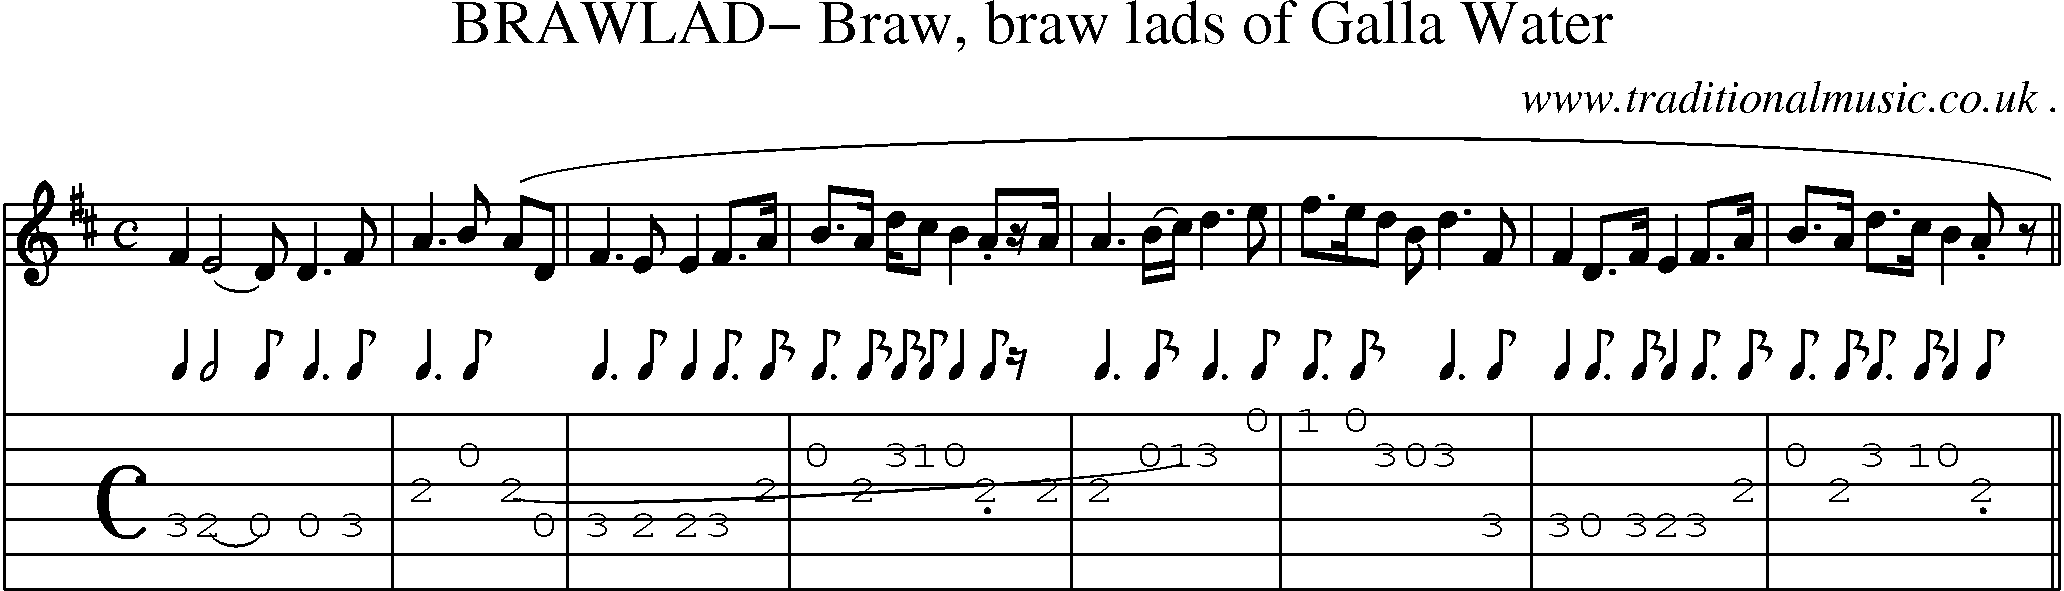 Sheet-Music and Guitar Tabs for Brawlad Braw Braw Lads Of Galla Water